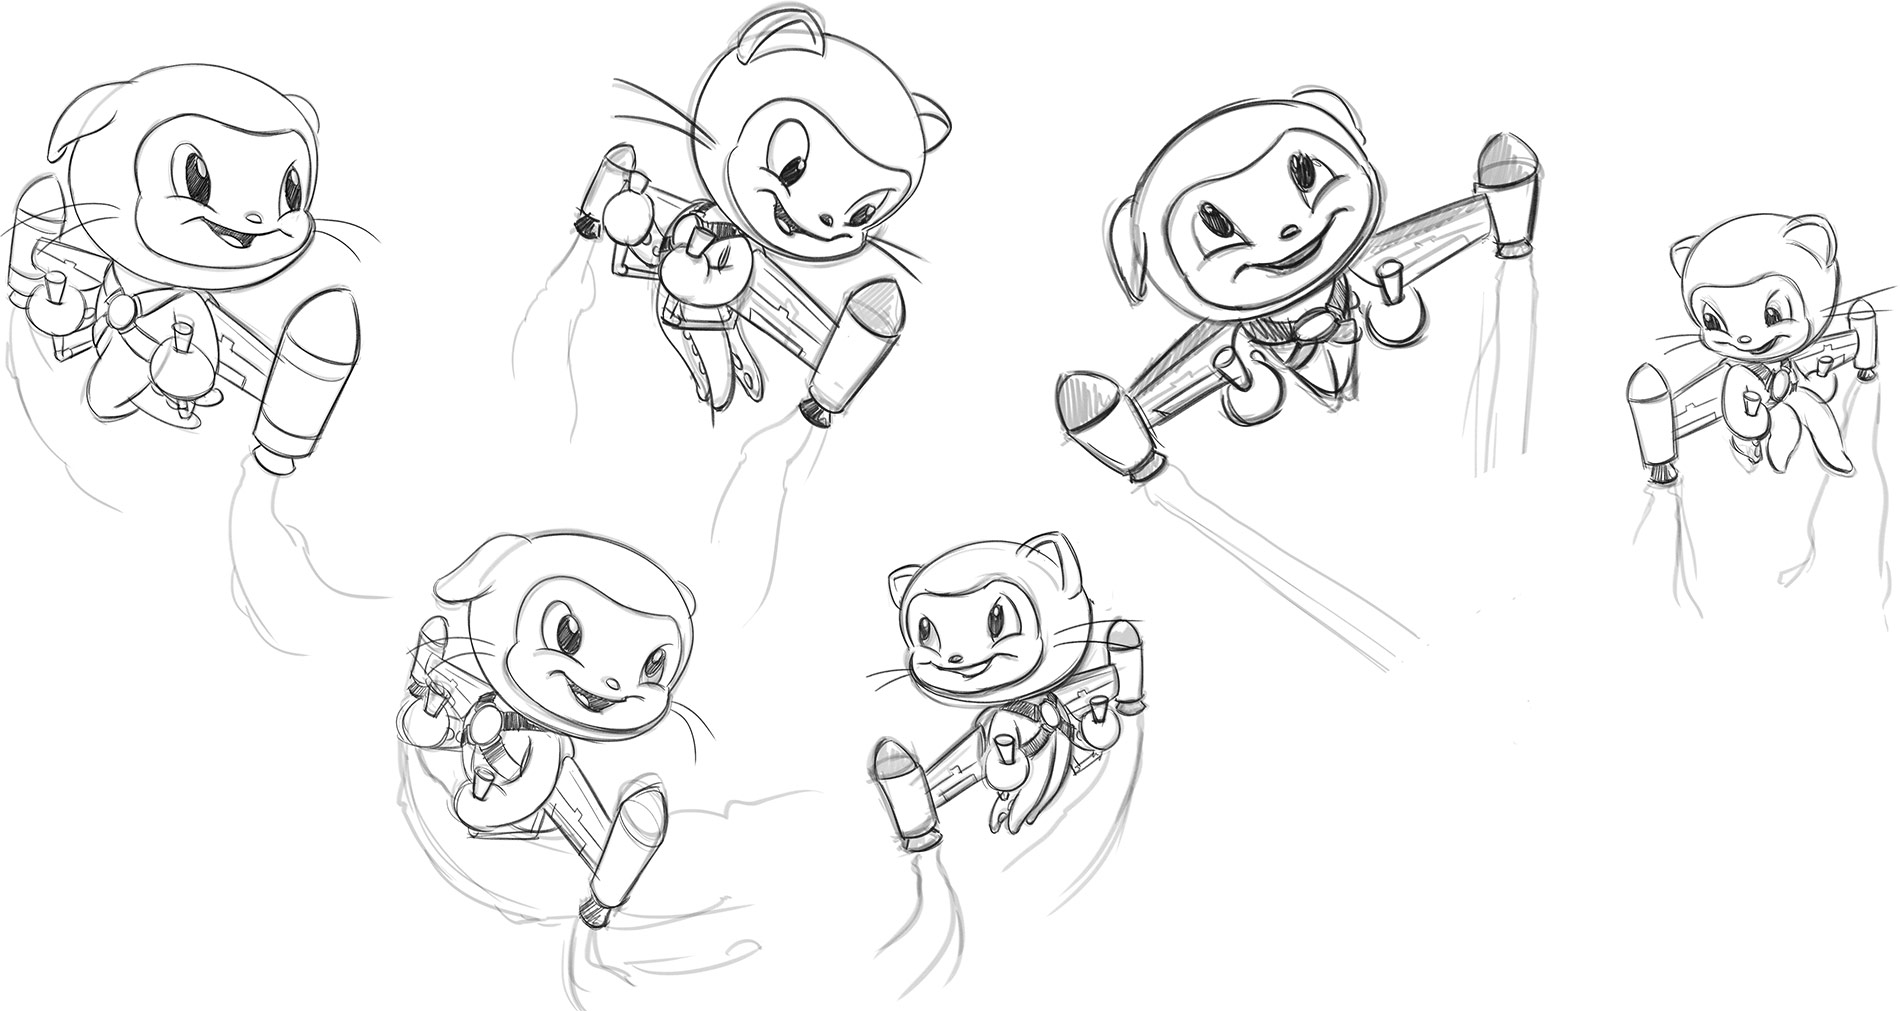 Early concept sketches developing the jetpack version of the Octocat